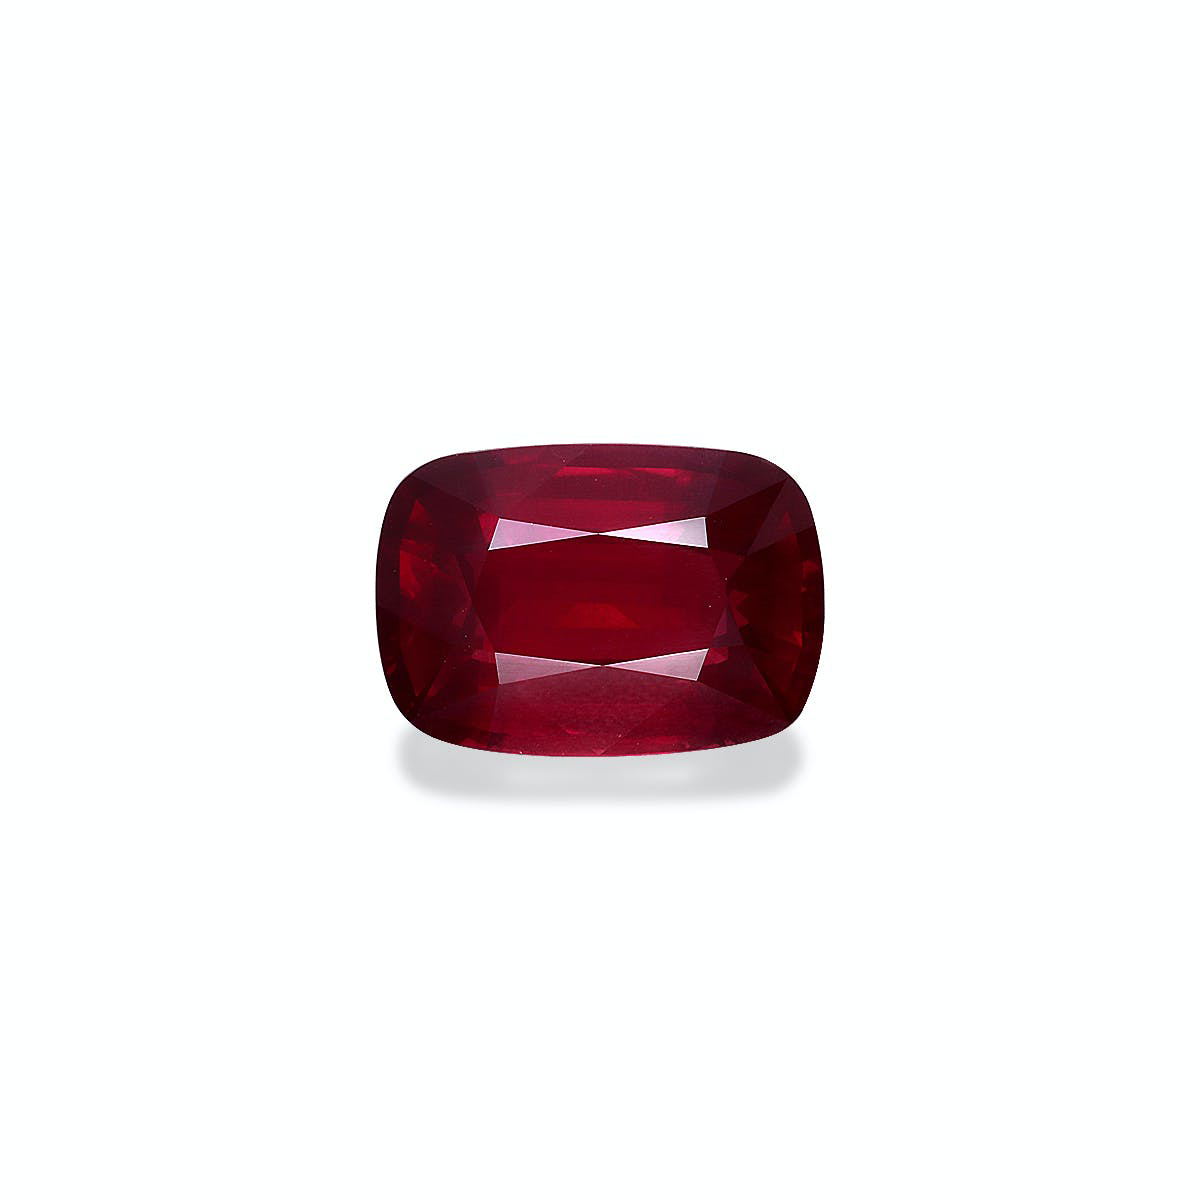 Pigeons Blood Heated Mozambique Ruby 7.06ct (AS0004)